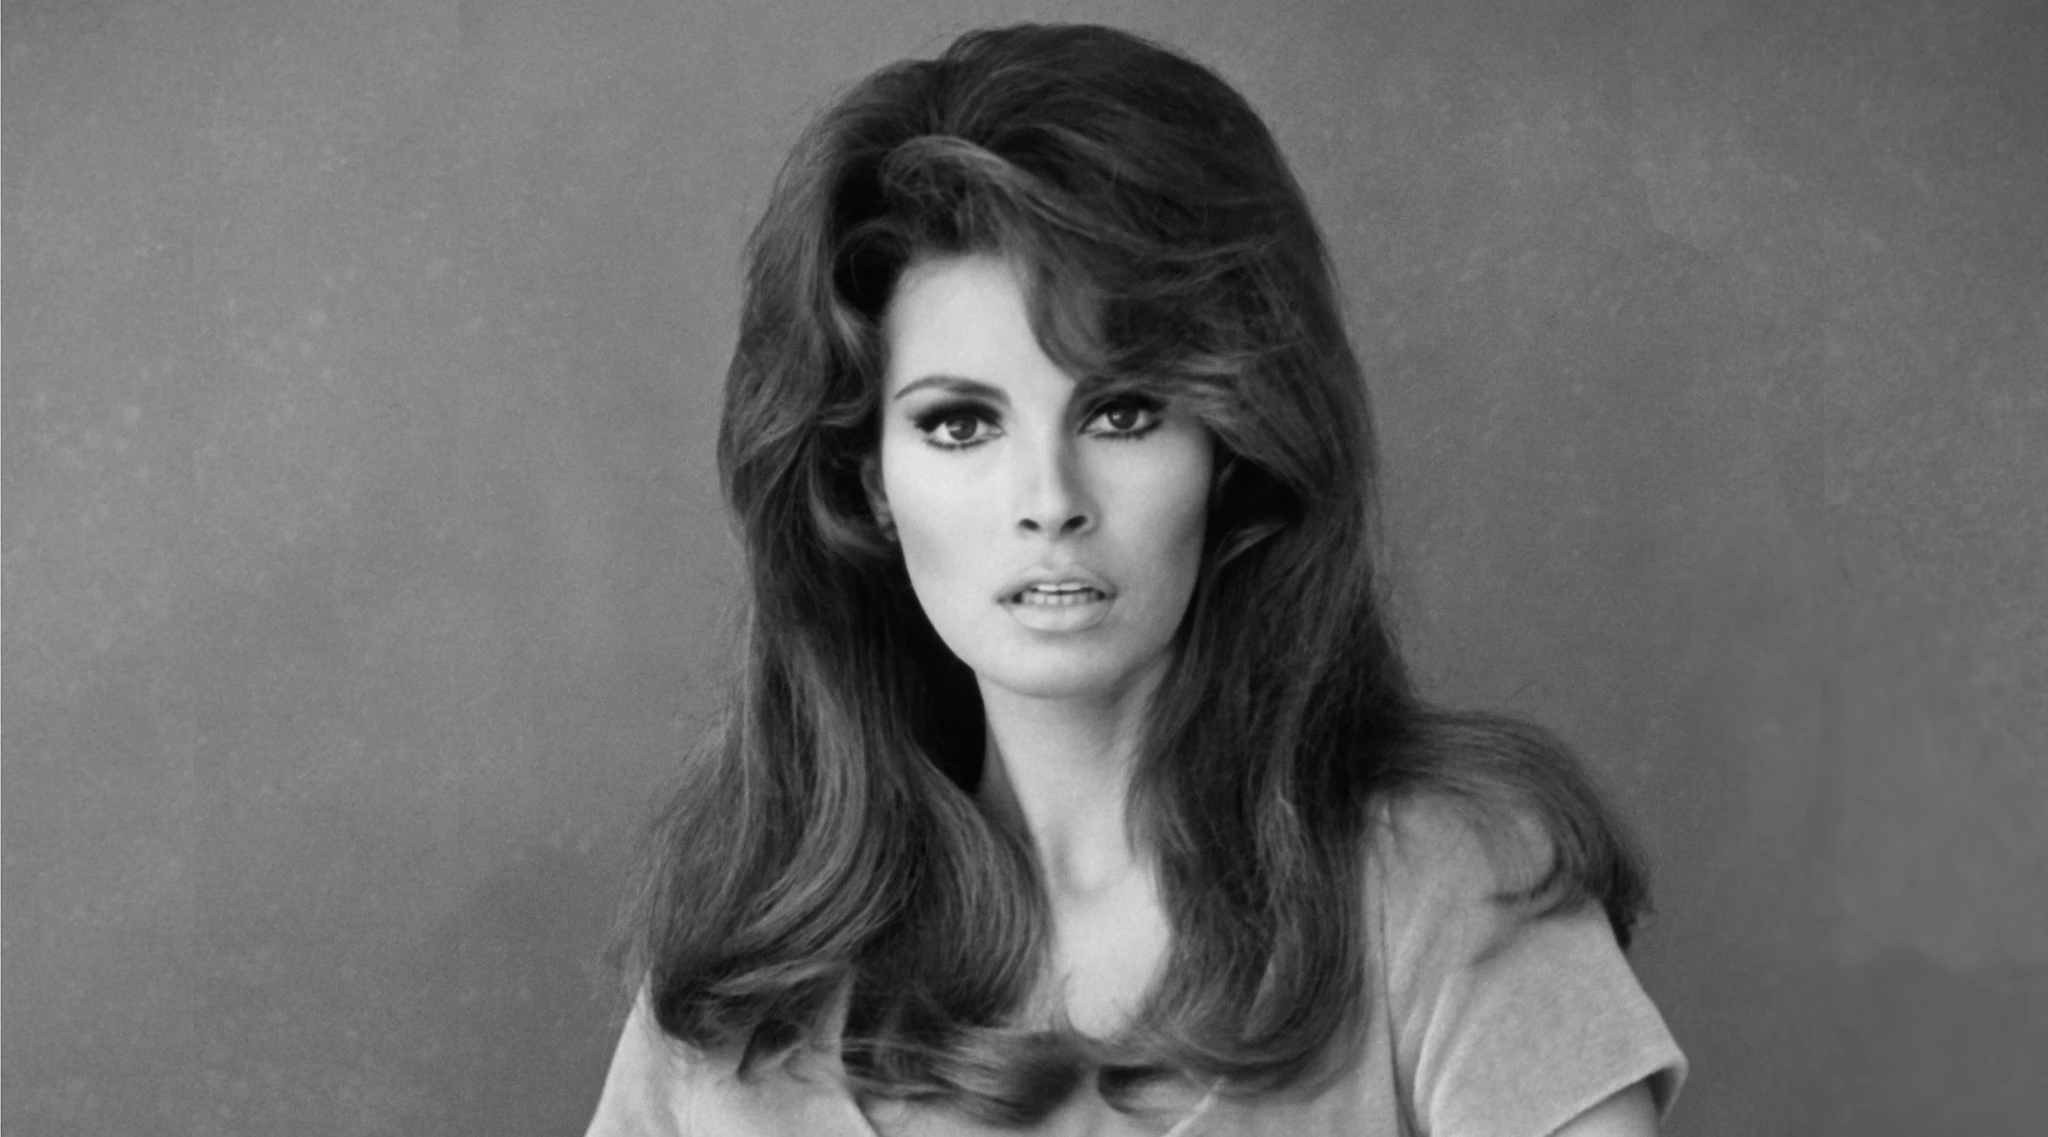 Raquel Welch, 'One Million Years B.C.' and 'The Three Musketeers' Actress, Dies at 82